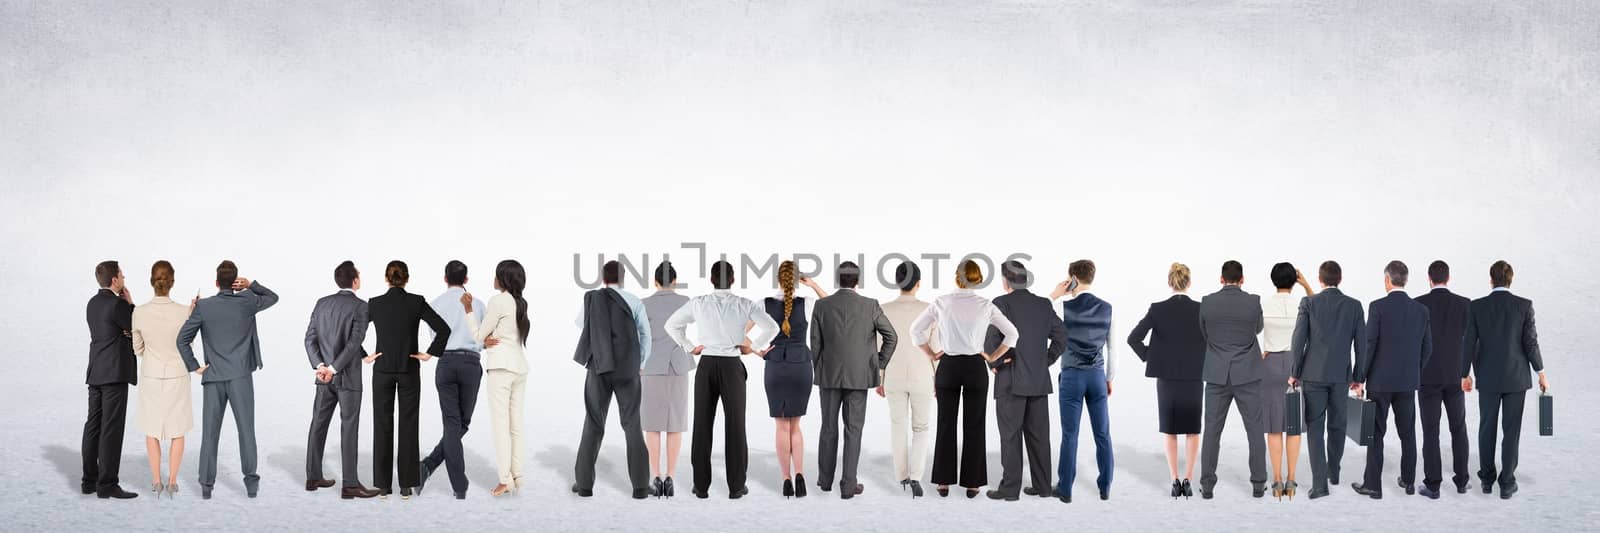 Group of business people standing in front of blank grey background by Wavebreakmedia